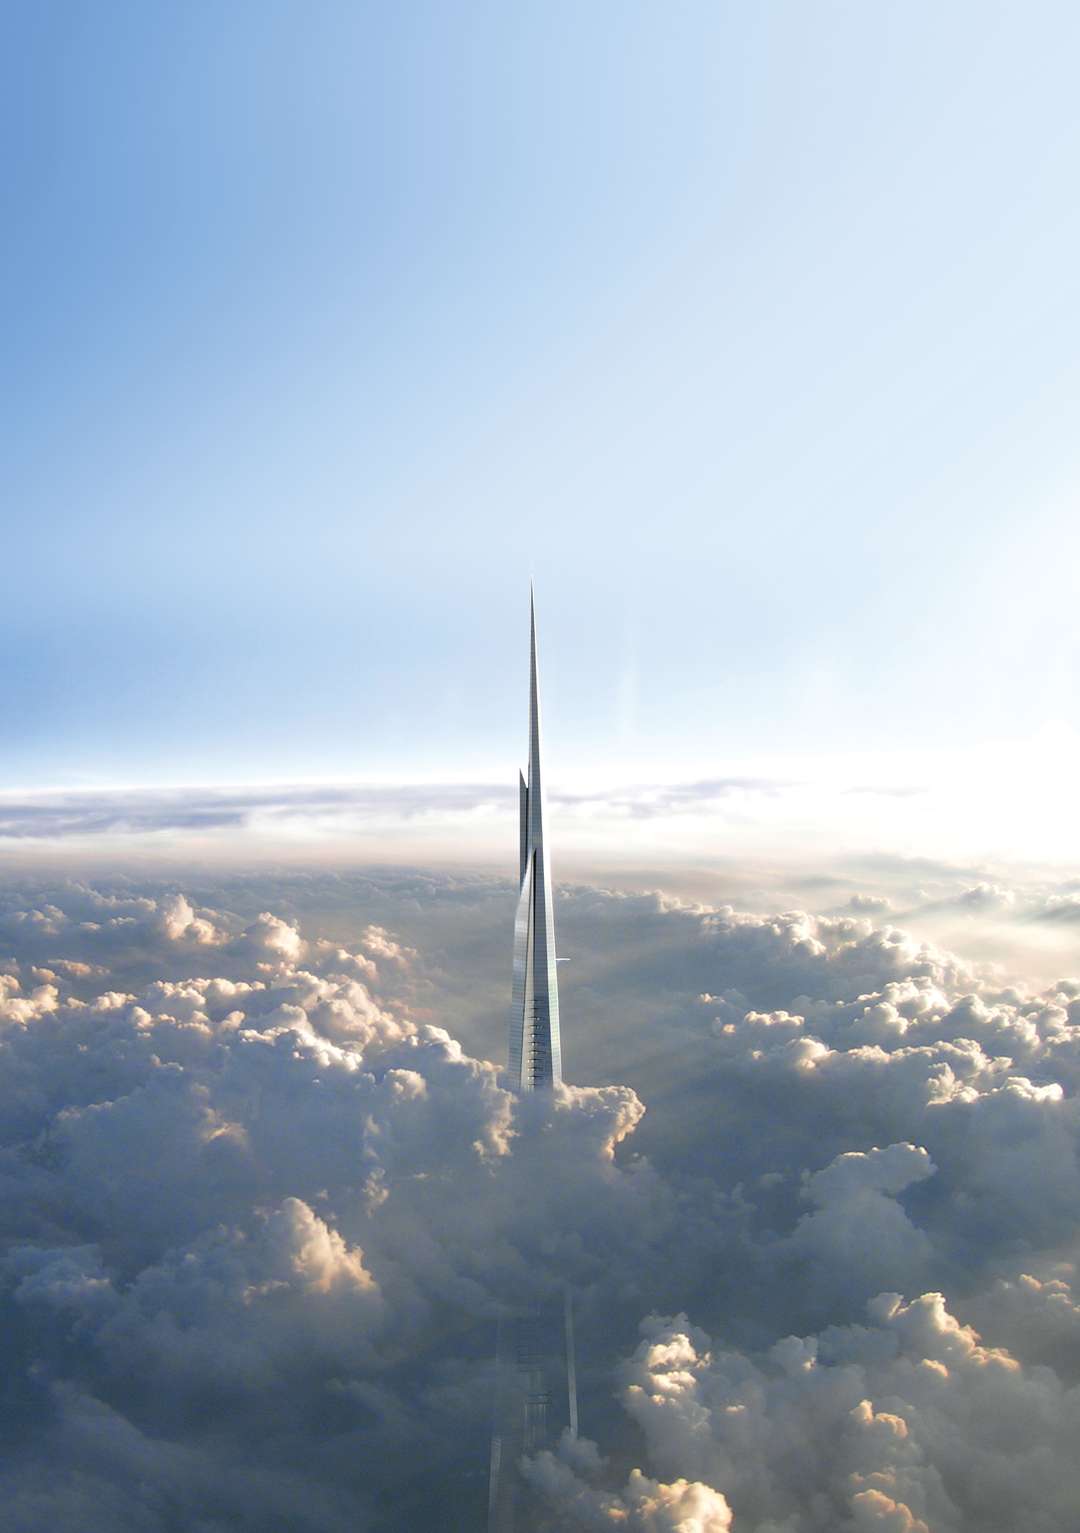 At more than 1 km, Kingdom Tower will be the world's tallest building.